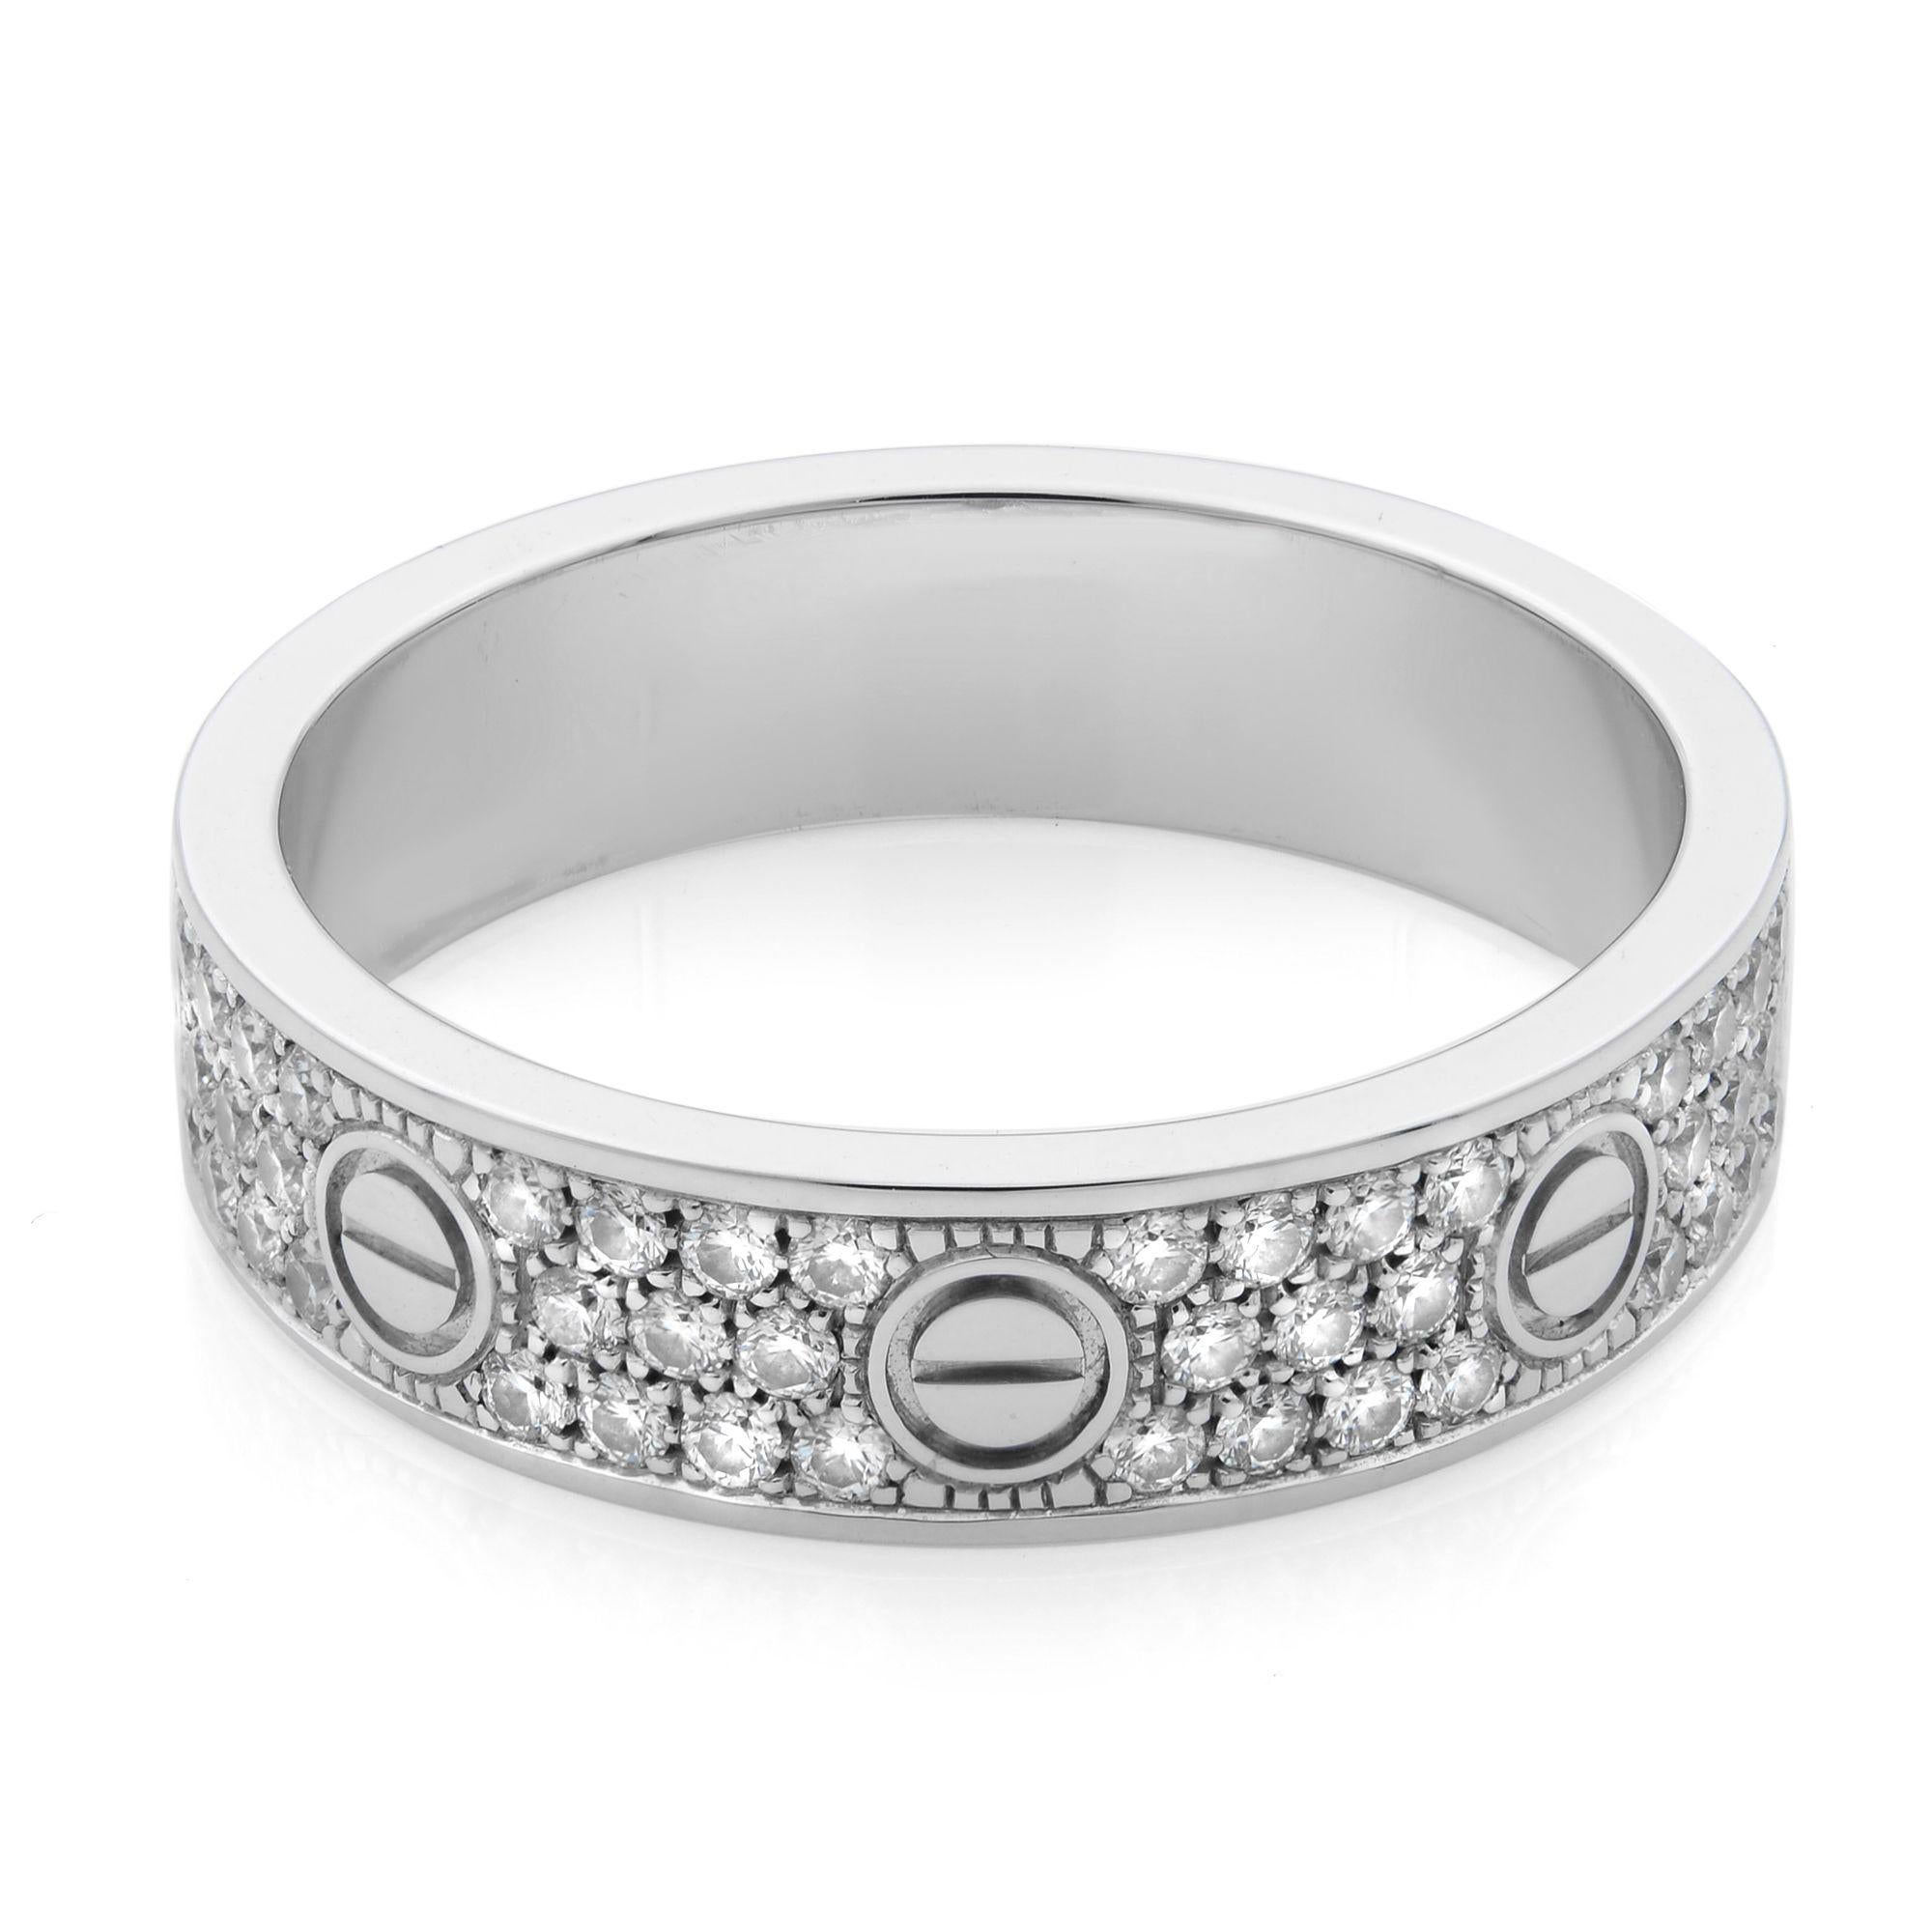 Cartier Love wedding band, 18K white gold, pave set with 88 brilliant-cut diamond totaling 0.31 carats. These rings are usually 4mm to 5mm width following sizes. This specific ring is 4.80mm. Ring size 53 US 6.25. Excellent pre-owned condition,